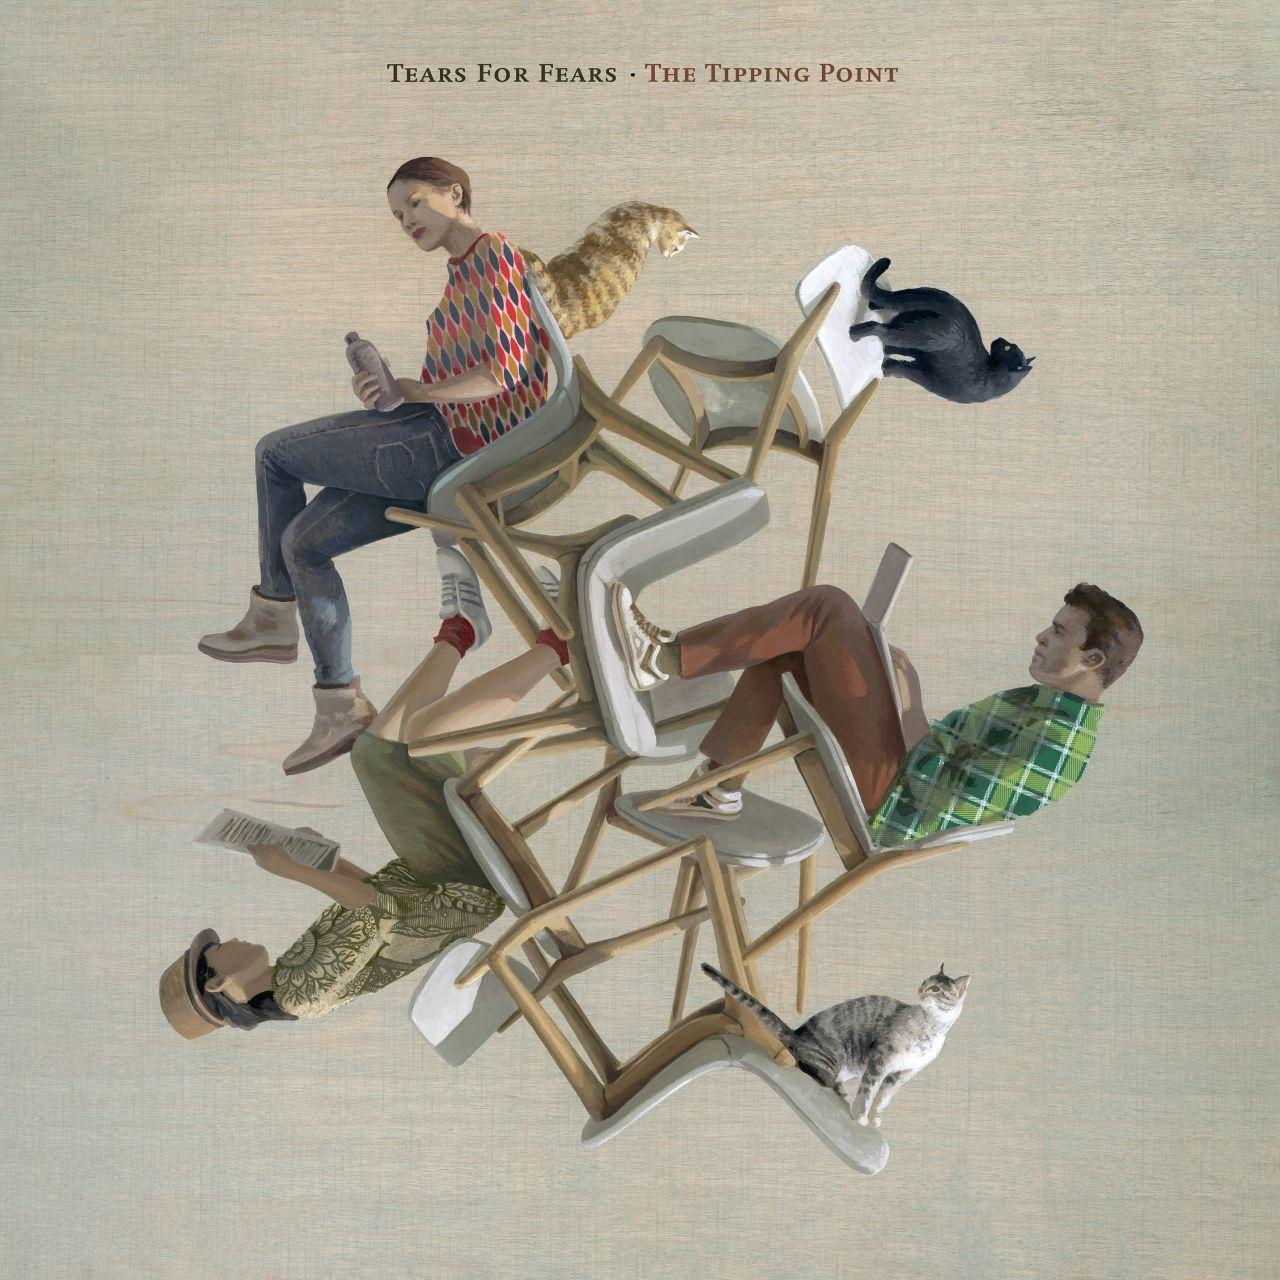 Point Tipping The Fears For - - Tears (CD)